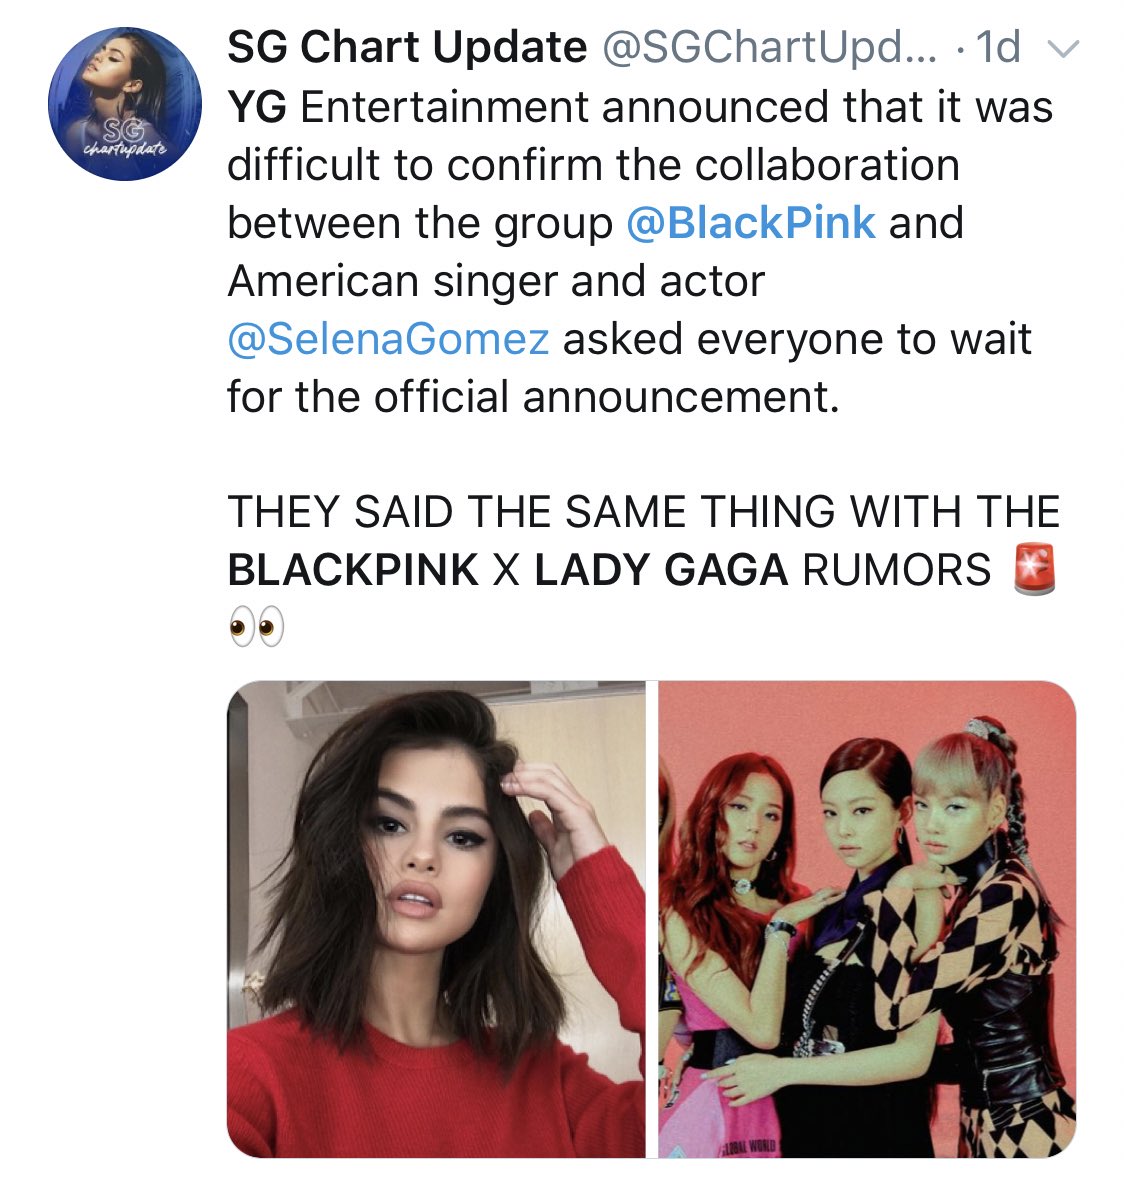 This wasn’t noticed until 5 days later when a reliable Korean source reported the BLACKPINK collab was to be with Selena Gomez.  @ygent_official announced to wait for an official confirmation, which was also said before a collab was officially announced with Lady Gaga